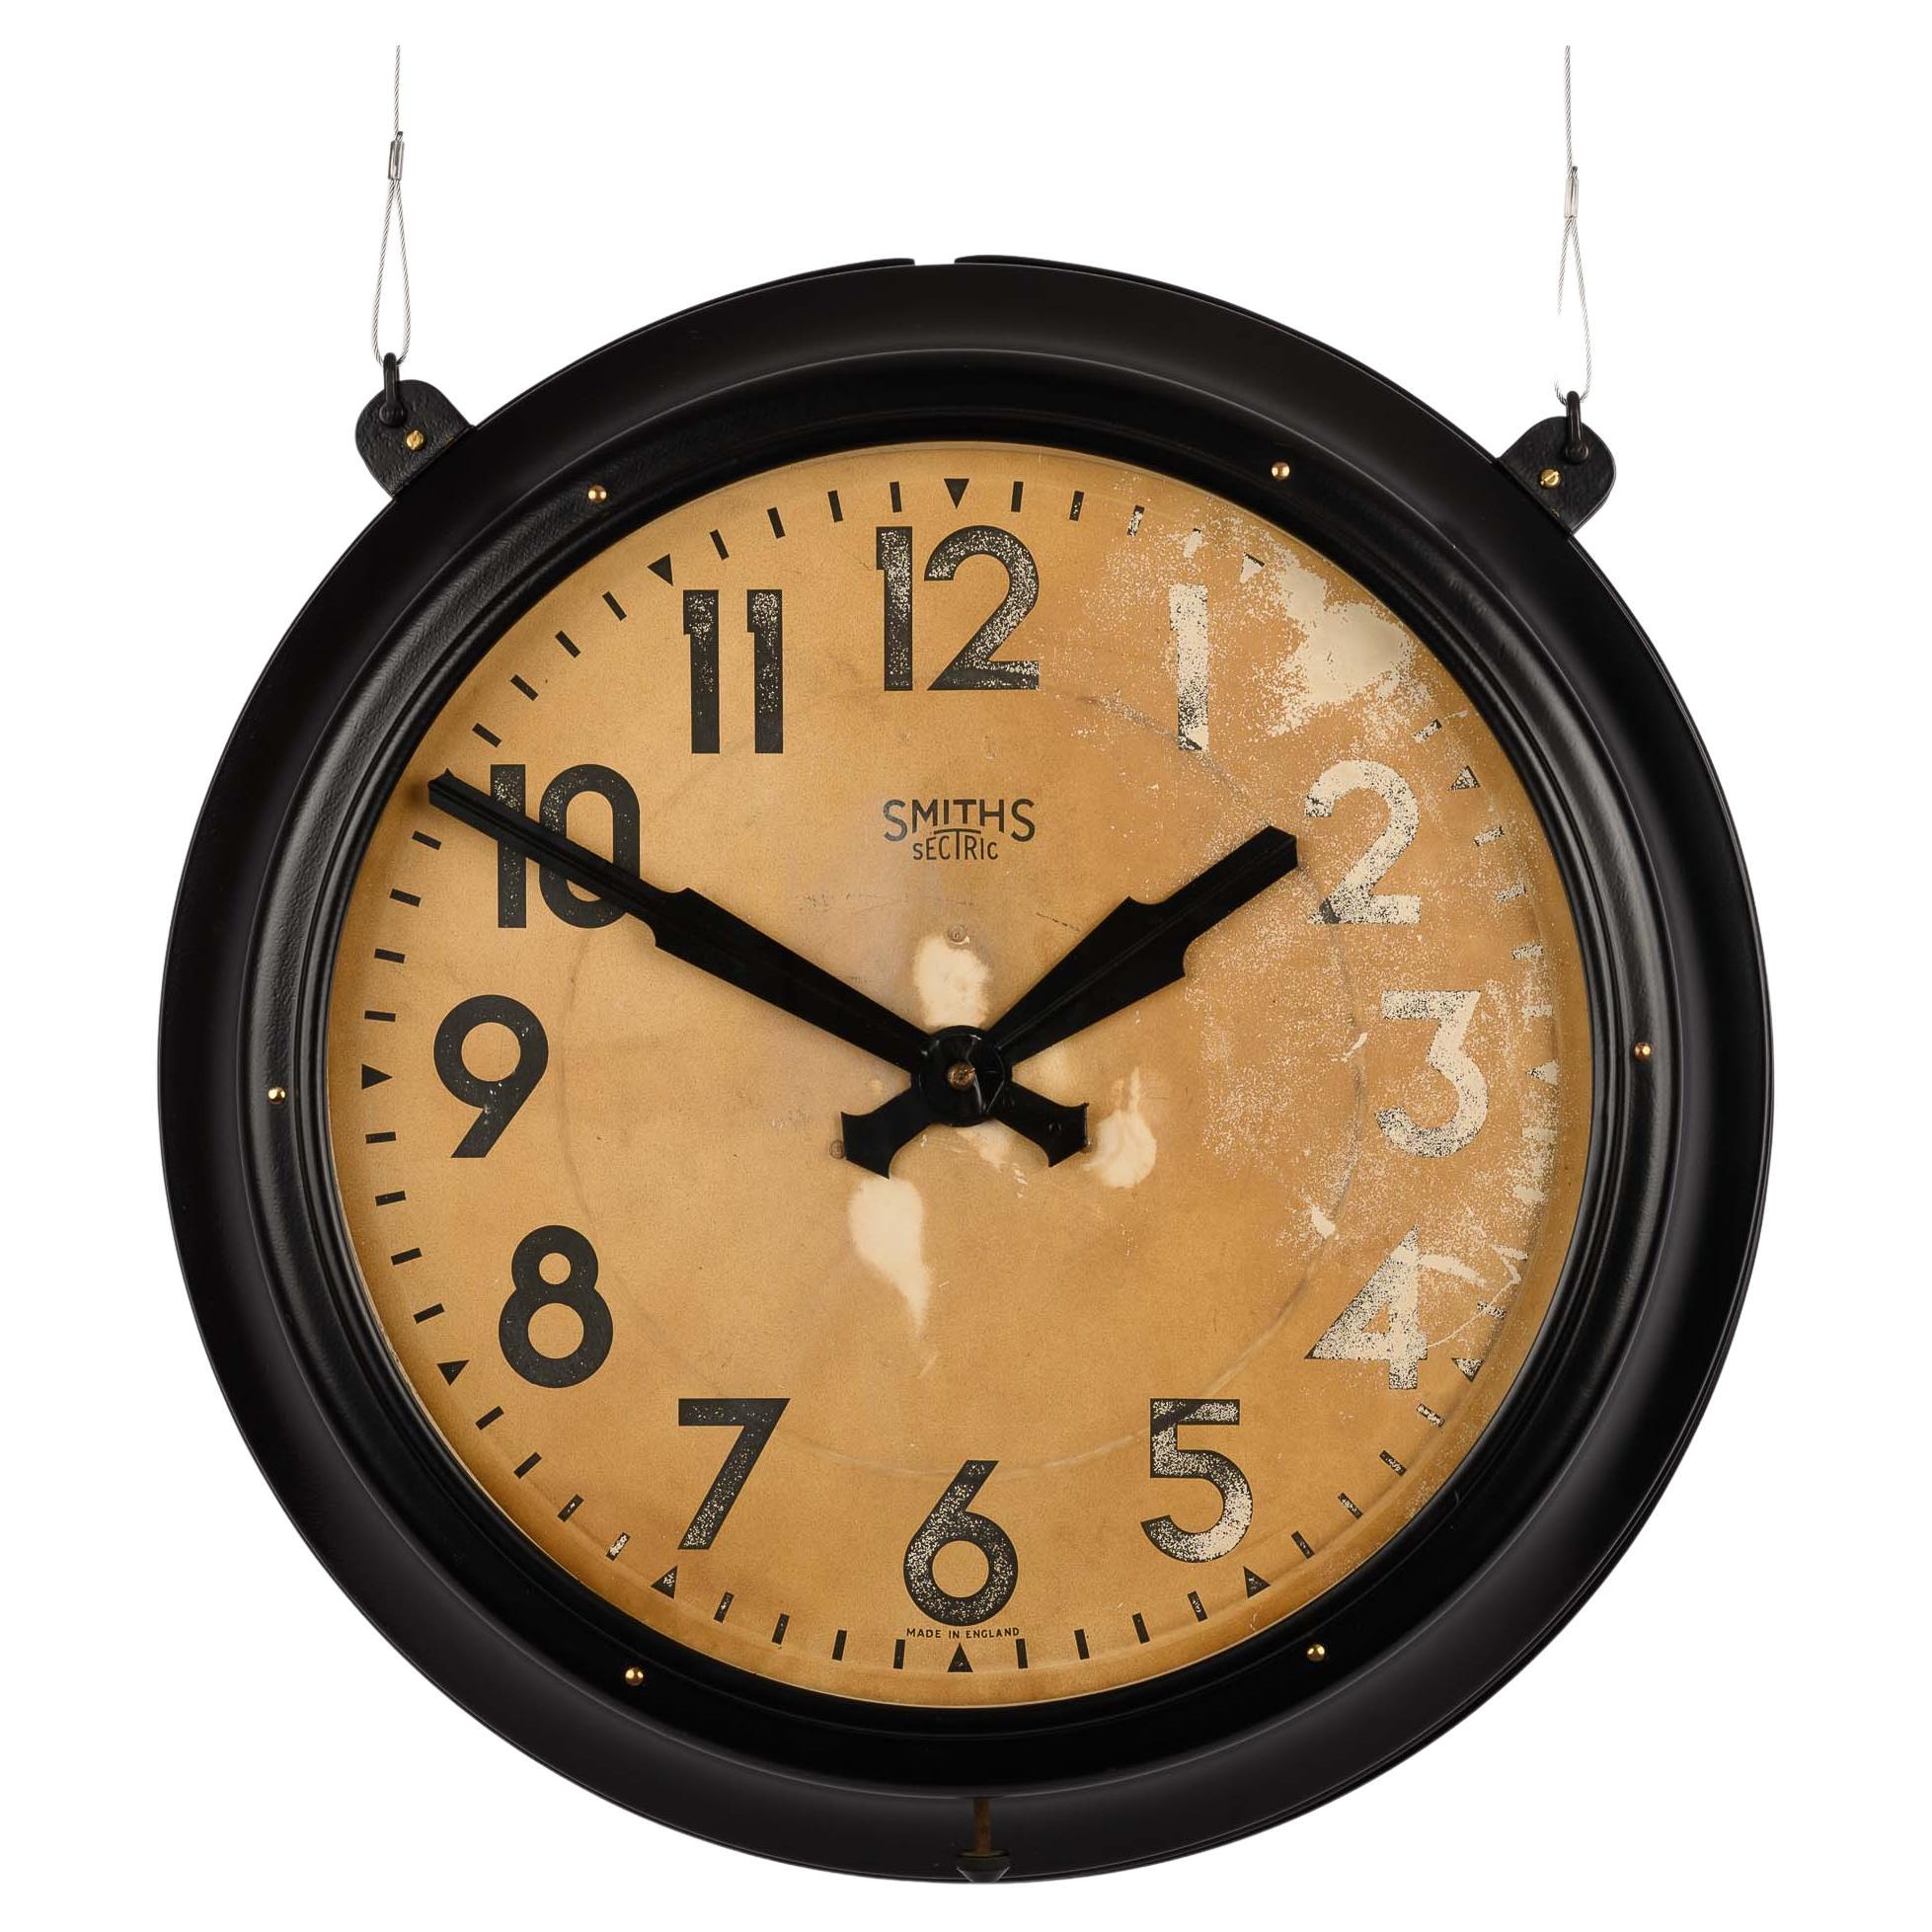 Original Double Sided Metal Industrial Station Clock by Smiths